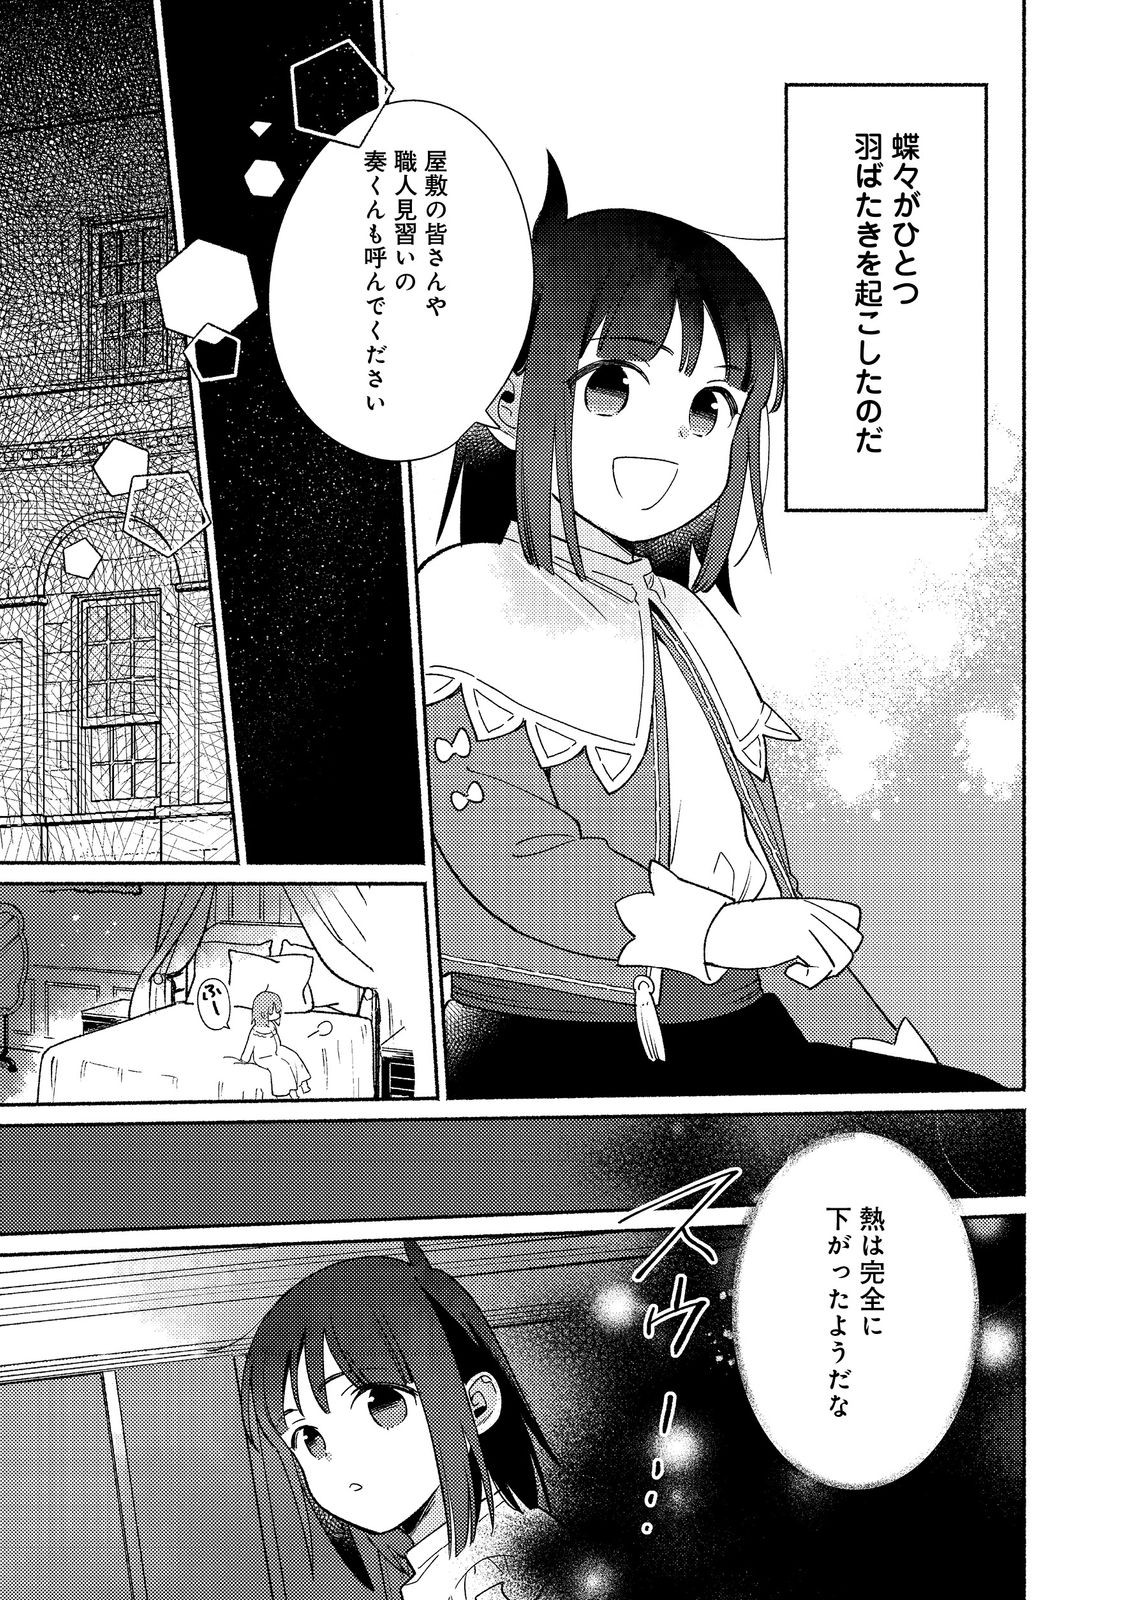 I’m the White Pig Nobleman 第23.1話 - Page 17